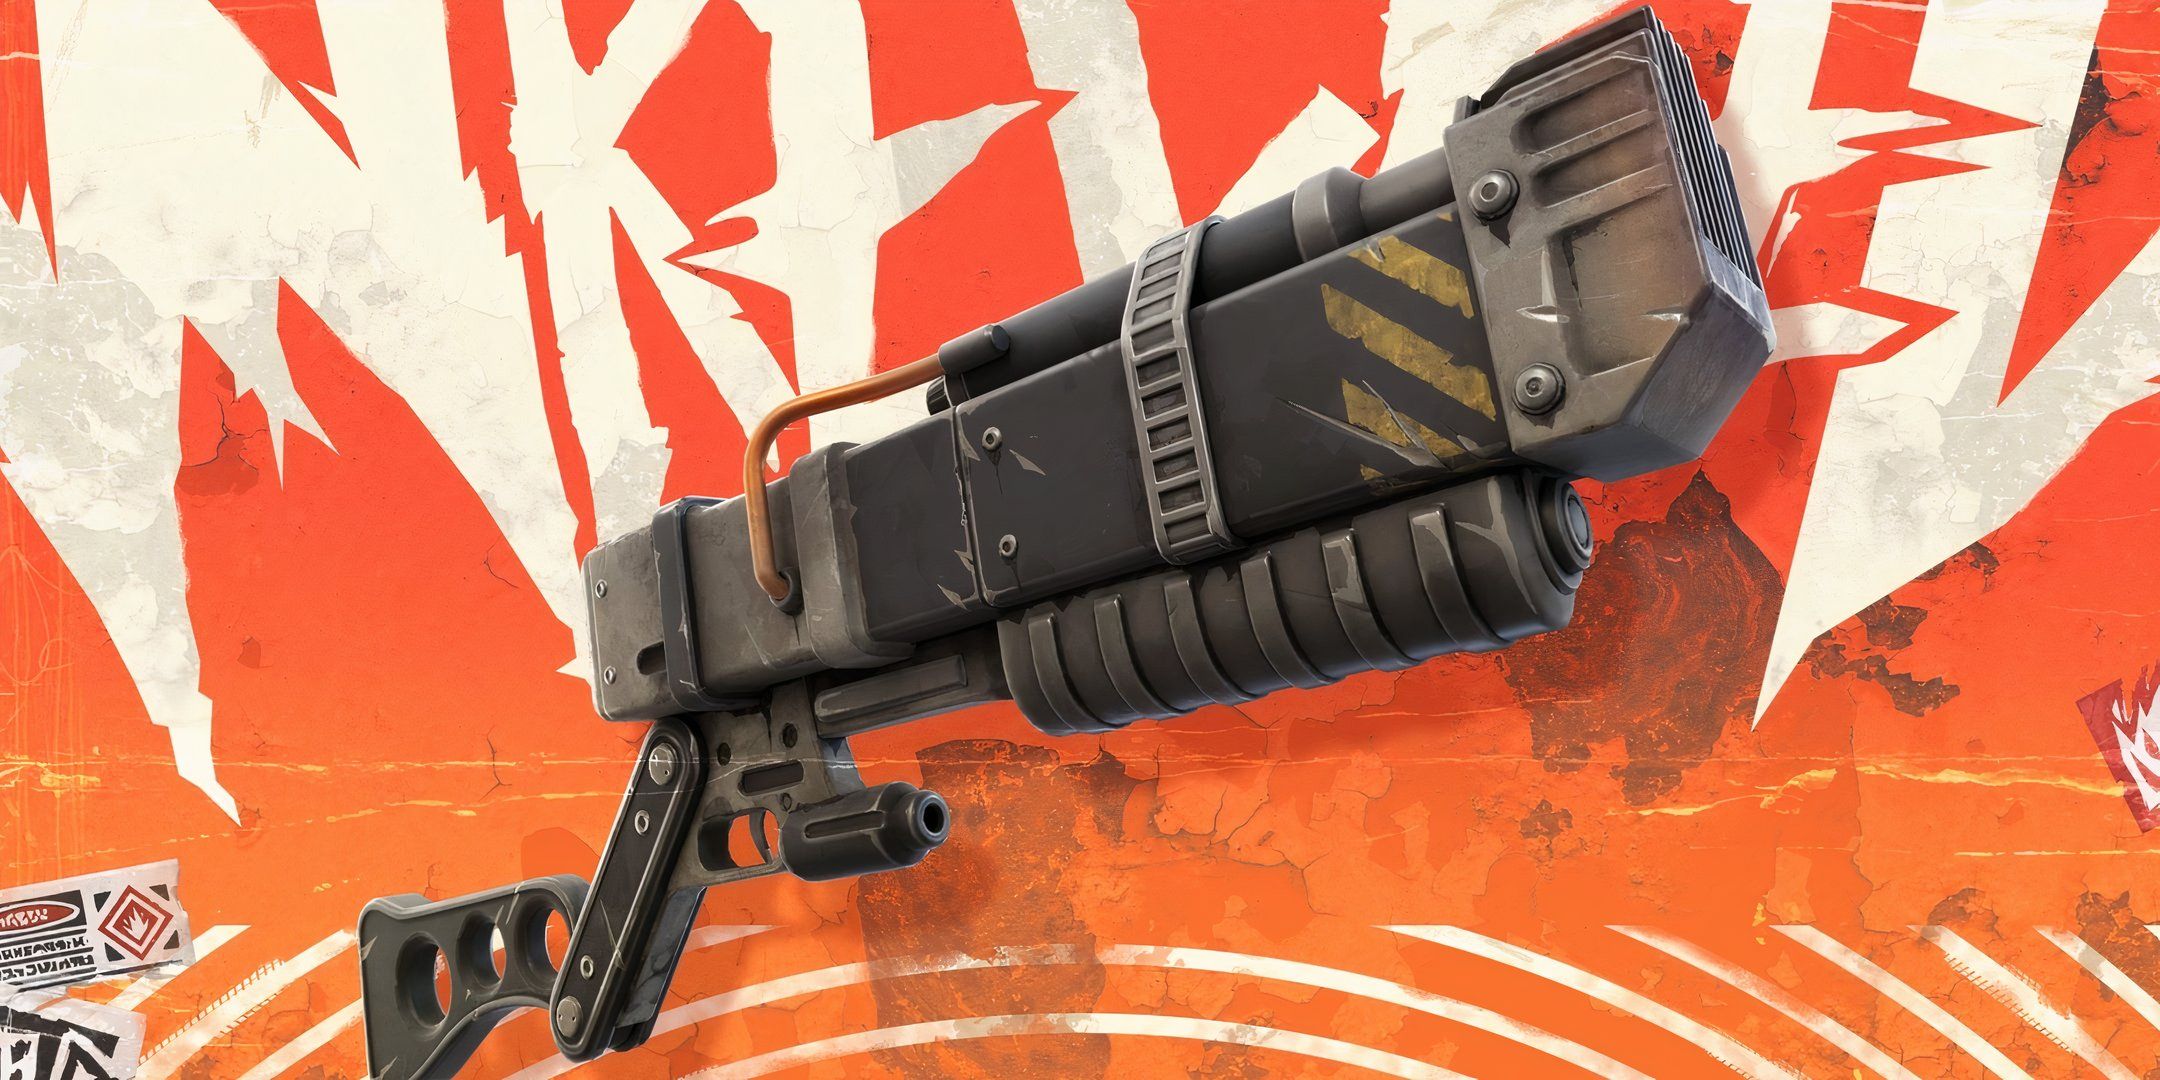 The tri-beam laser rifle from Fallout, as it appears in Fortnite